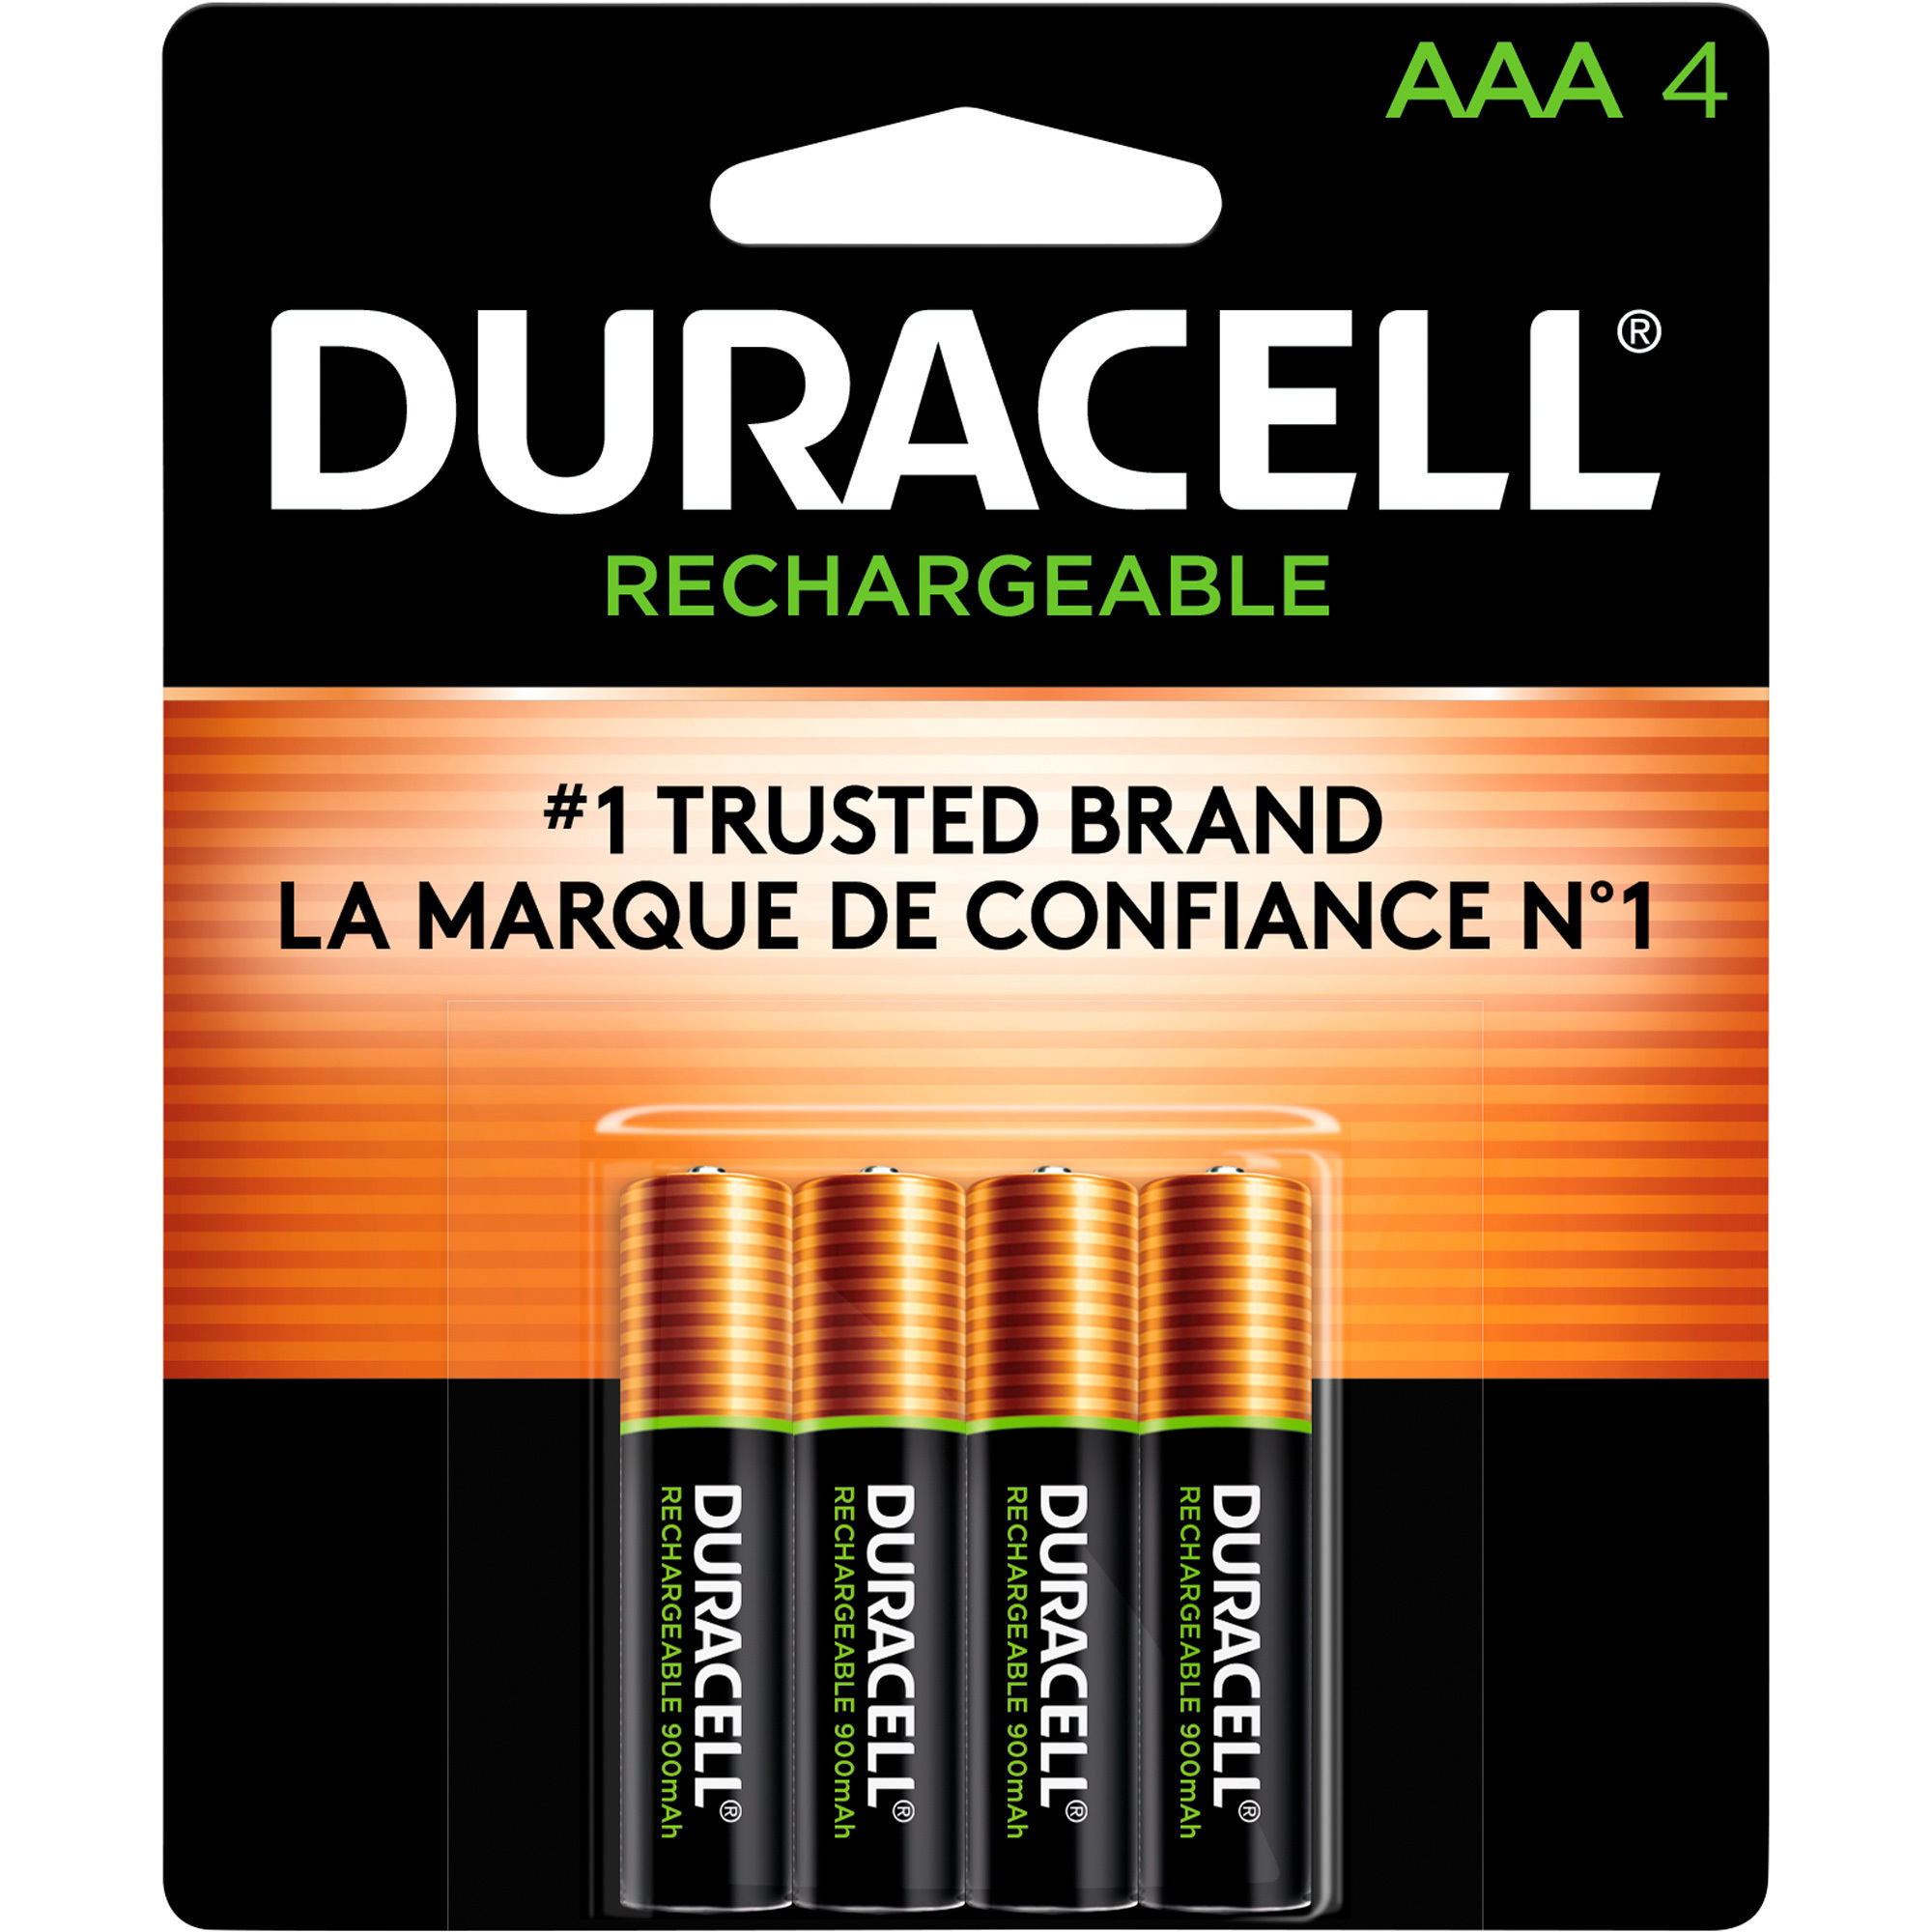 Duracell Rechargeable, Pre-Charged NiMH Batteries â 4-Pack AAA